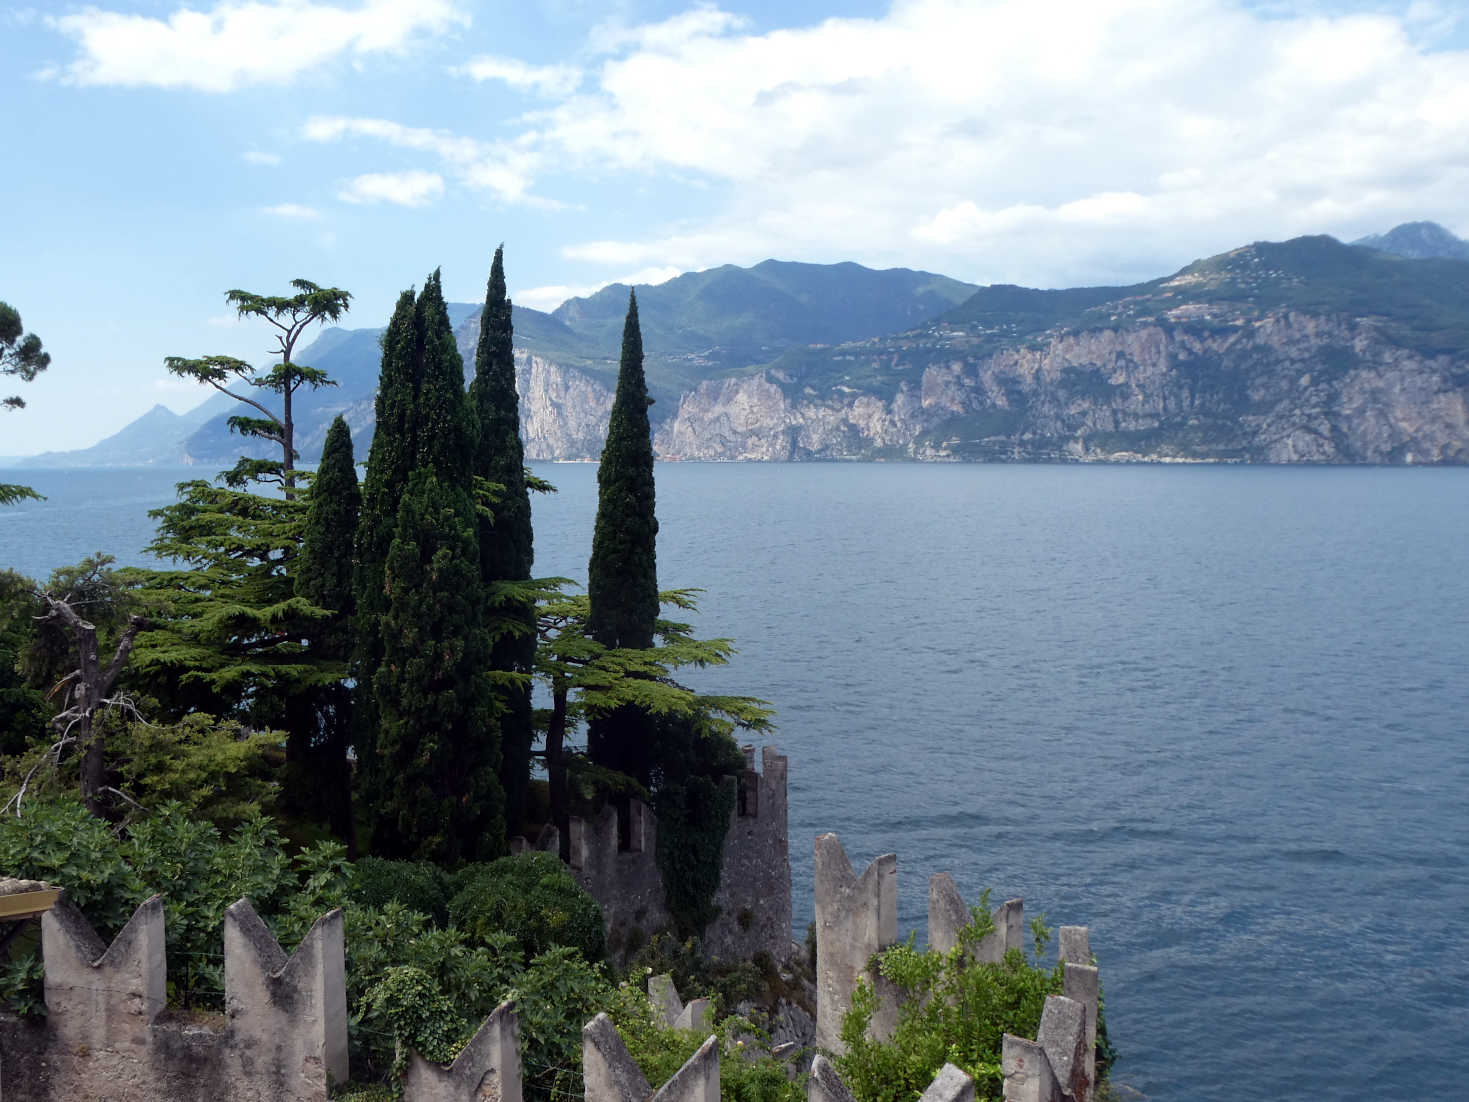 View of Lake Garda from the castle in Malcesine